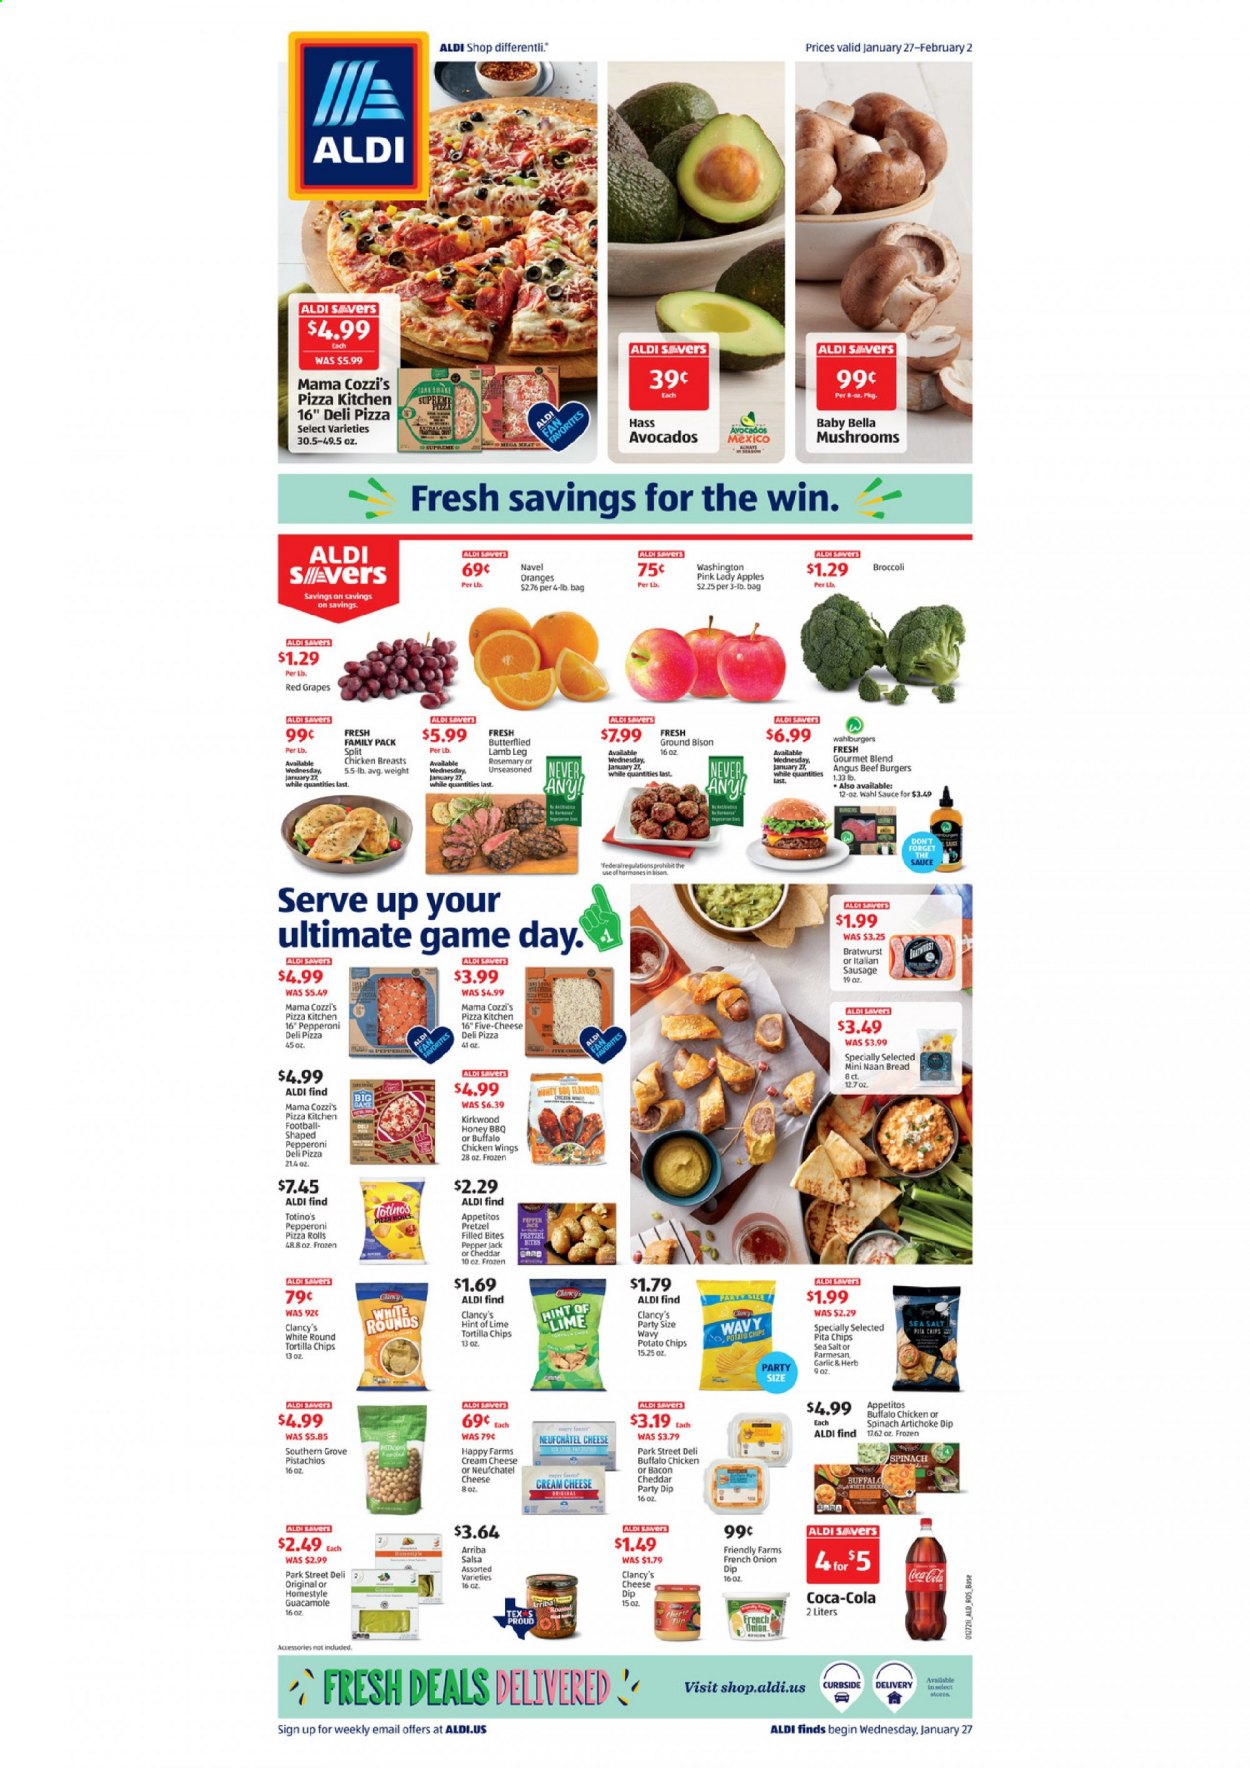 thumbnail - ALDI Flyer - Sales products - mushrooms, AVG, bread, pretzels, pizza rolls, apples, oranges, cream cheese, pizza, hamburger, beef burger, bacon, bratwurst, sausage, pepperoni, italian sausage, guacamole, Neufchâtel, parmesan, Pepper Jack cheese, salsa, dip, spinach, chicken wings, tortilla chips, potato chips, sea salt, rosemary, honey, pistachios, Coca-Cola, chicken breasts, beef meat, lamb meat, lamb leg, Bella, Almay. Page 1.